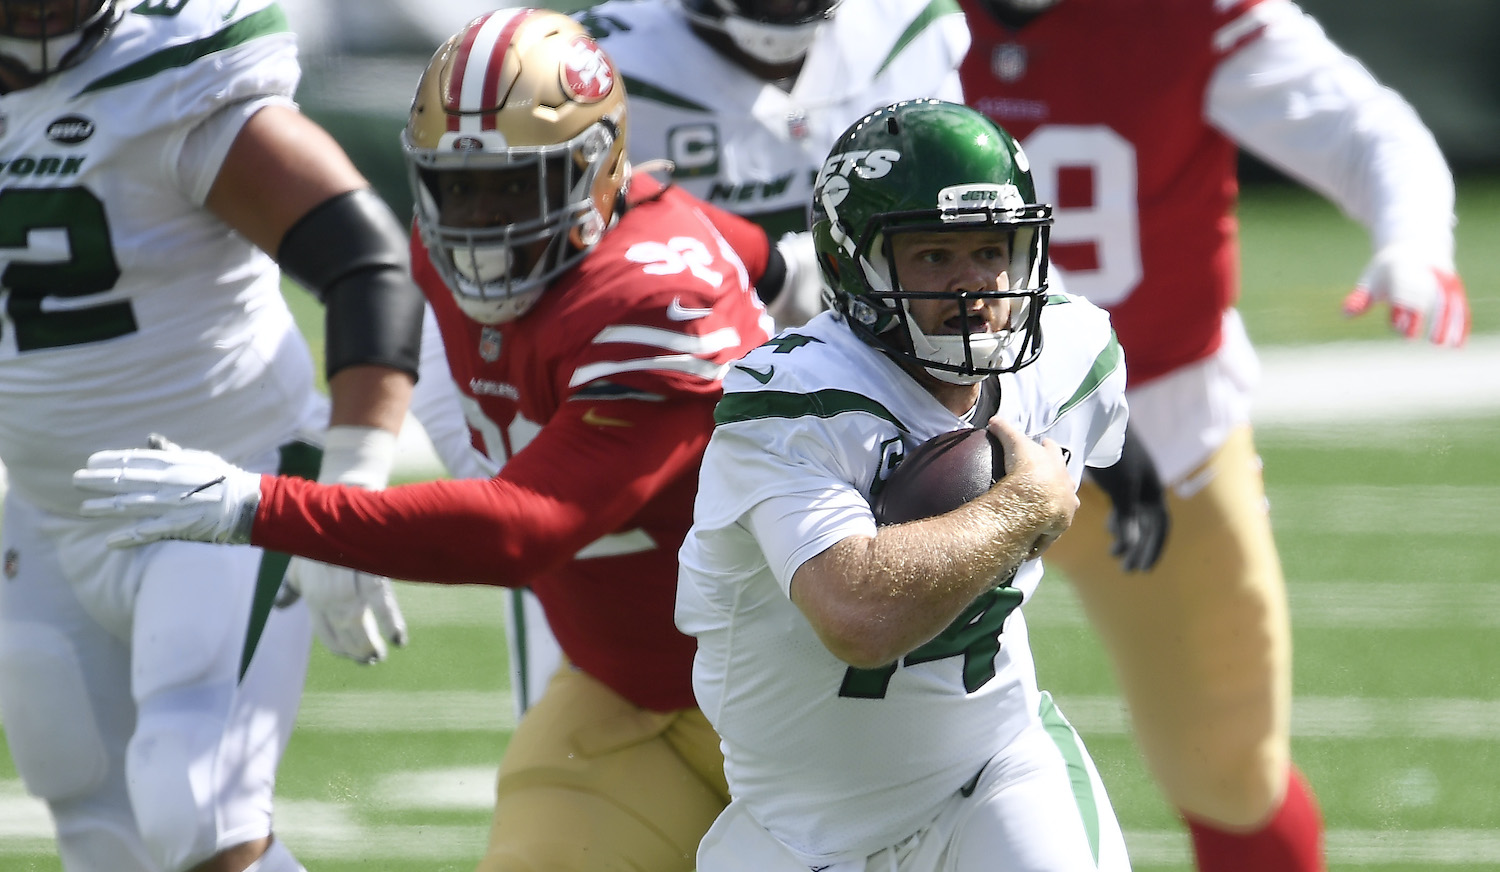 Sam Darnold of the Jets tries to avoid a sack.